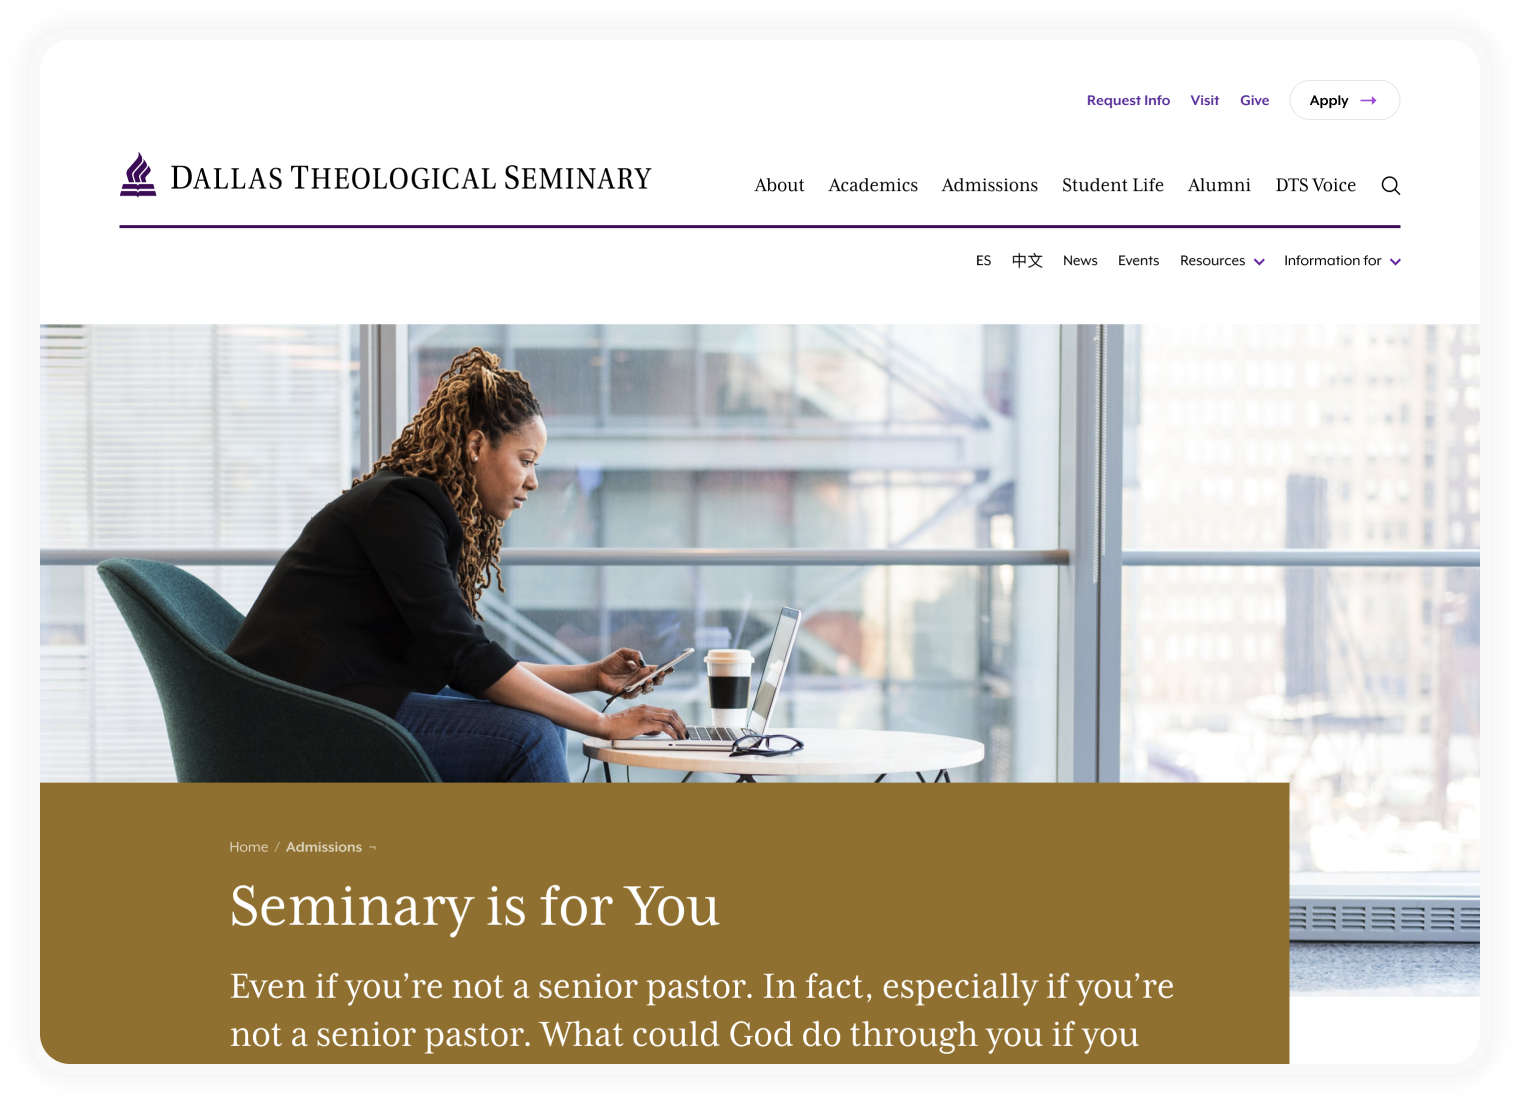 Dallas Theological Seminary screenshot of the Seminary is for You landing page